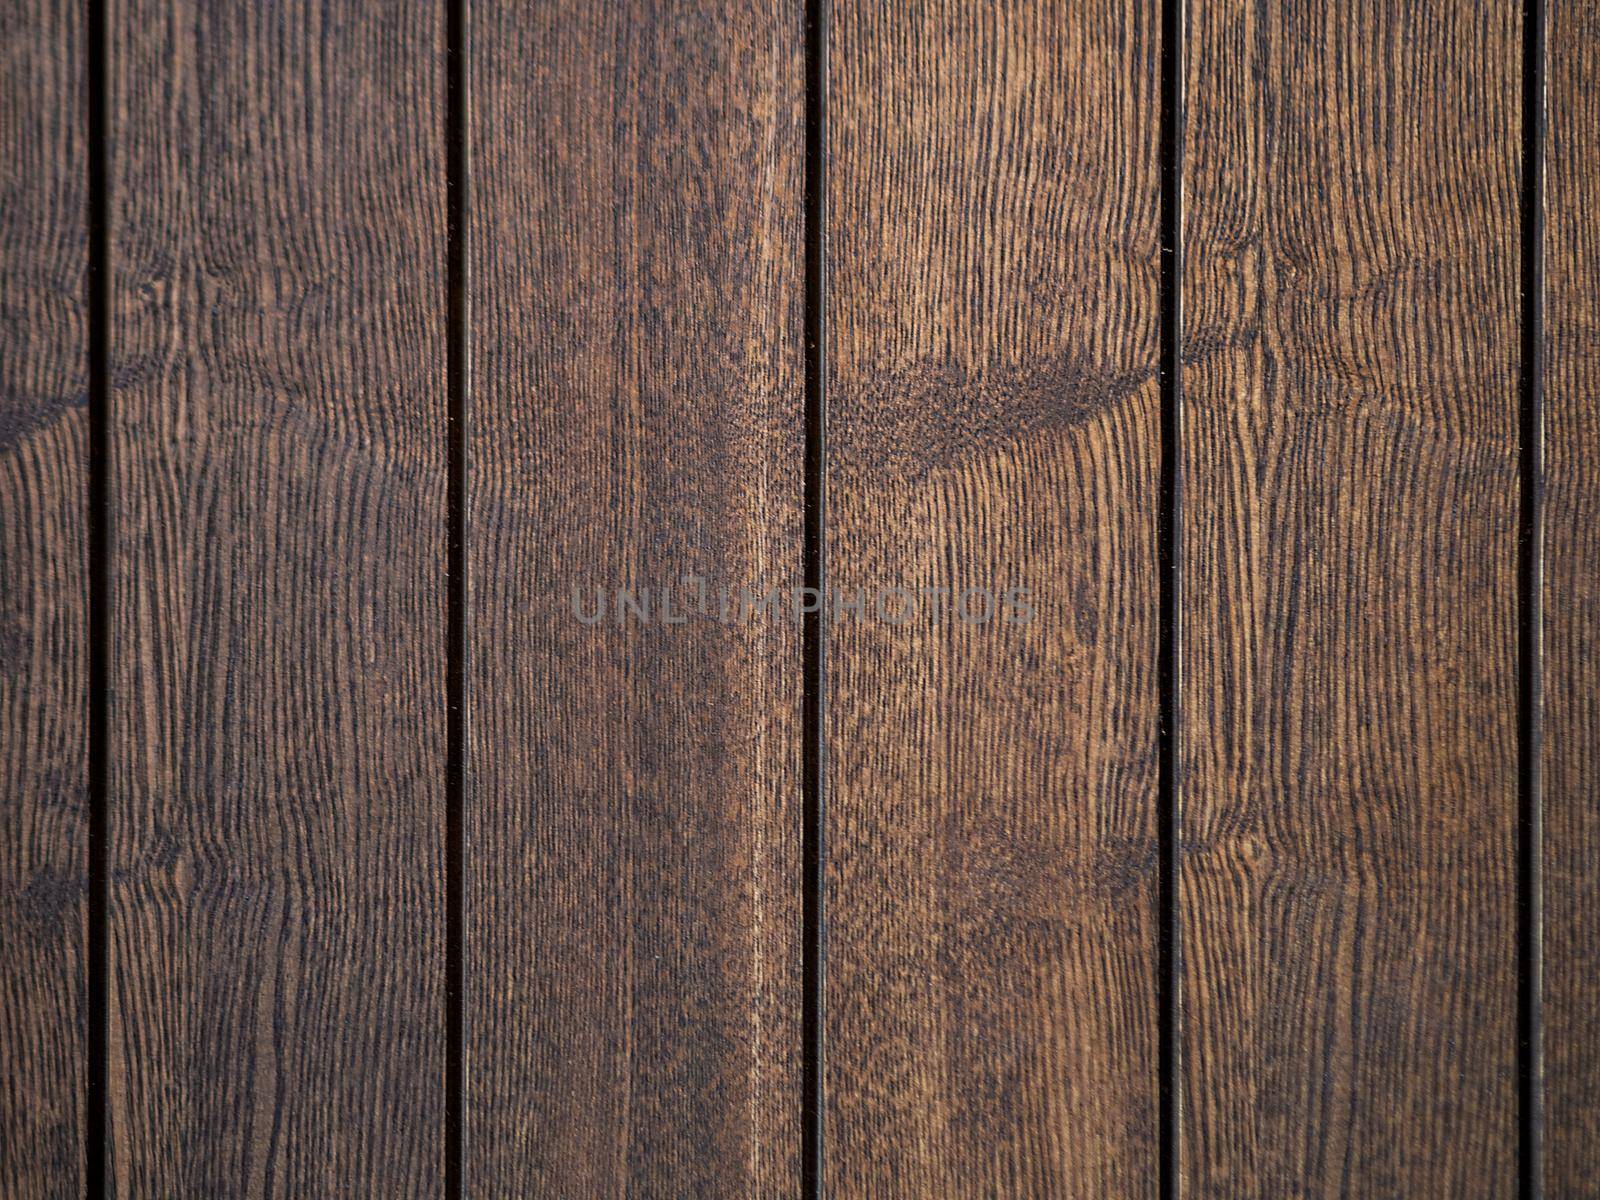 wood board texture. abstract nature background with surface wooden pattern plates. empty space and illustration for decorative website object texture or concept design by Andre1ns